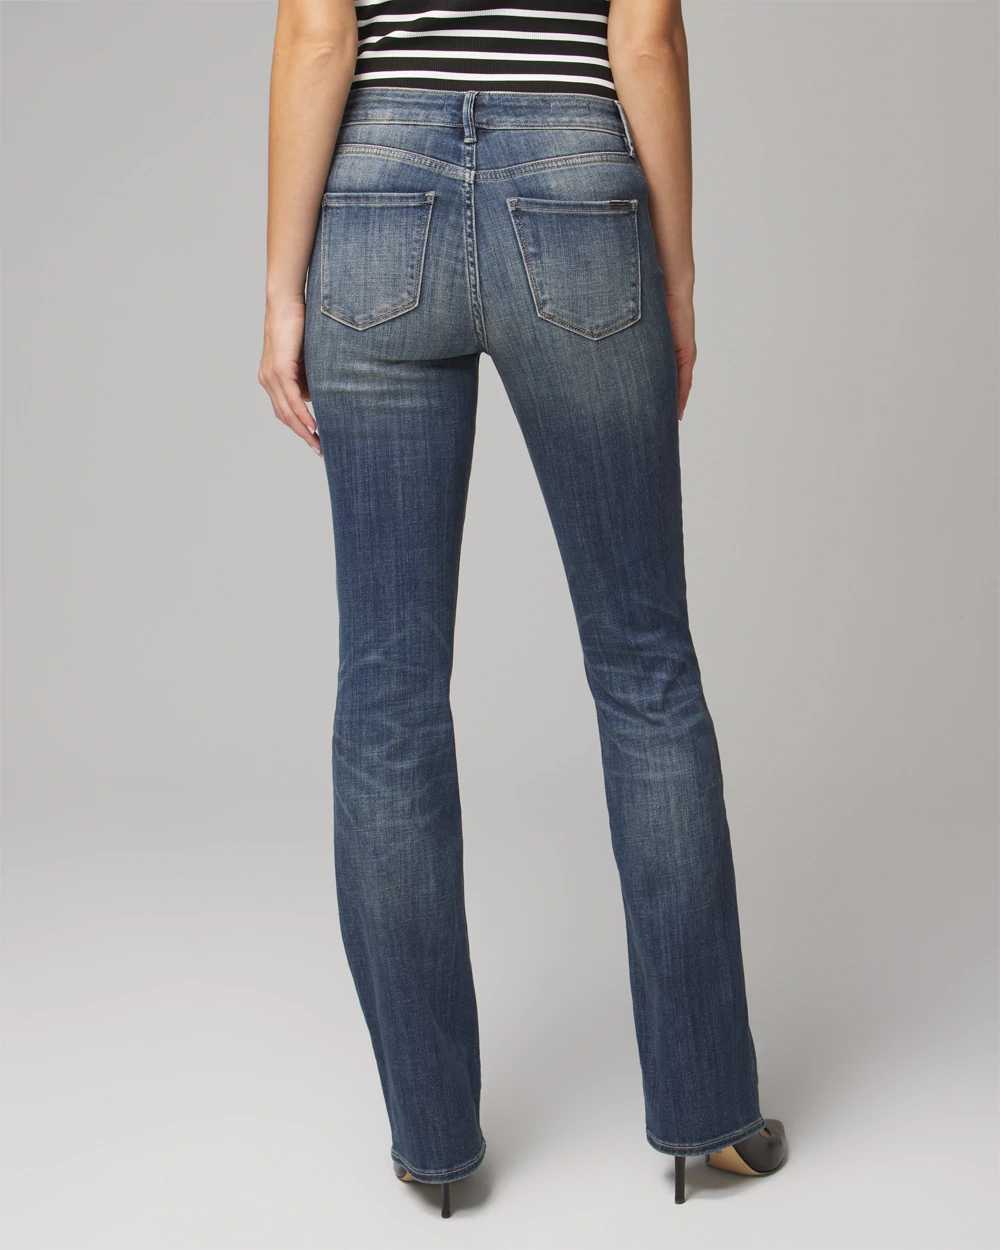 Mid-Rise Everyday Soft Denim  Bootcut Jeans click to view larger image.